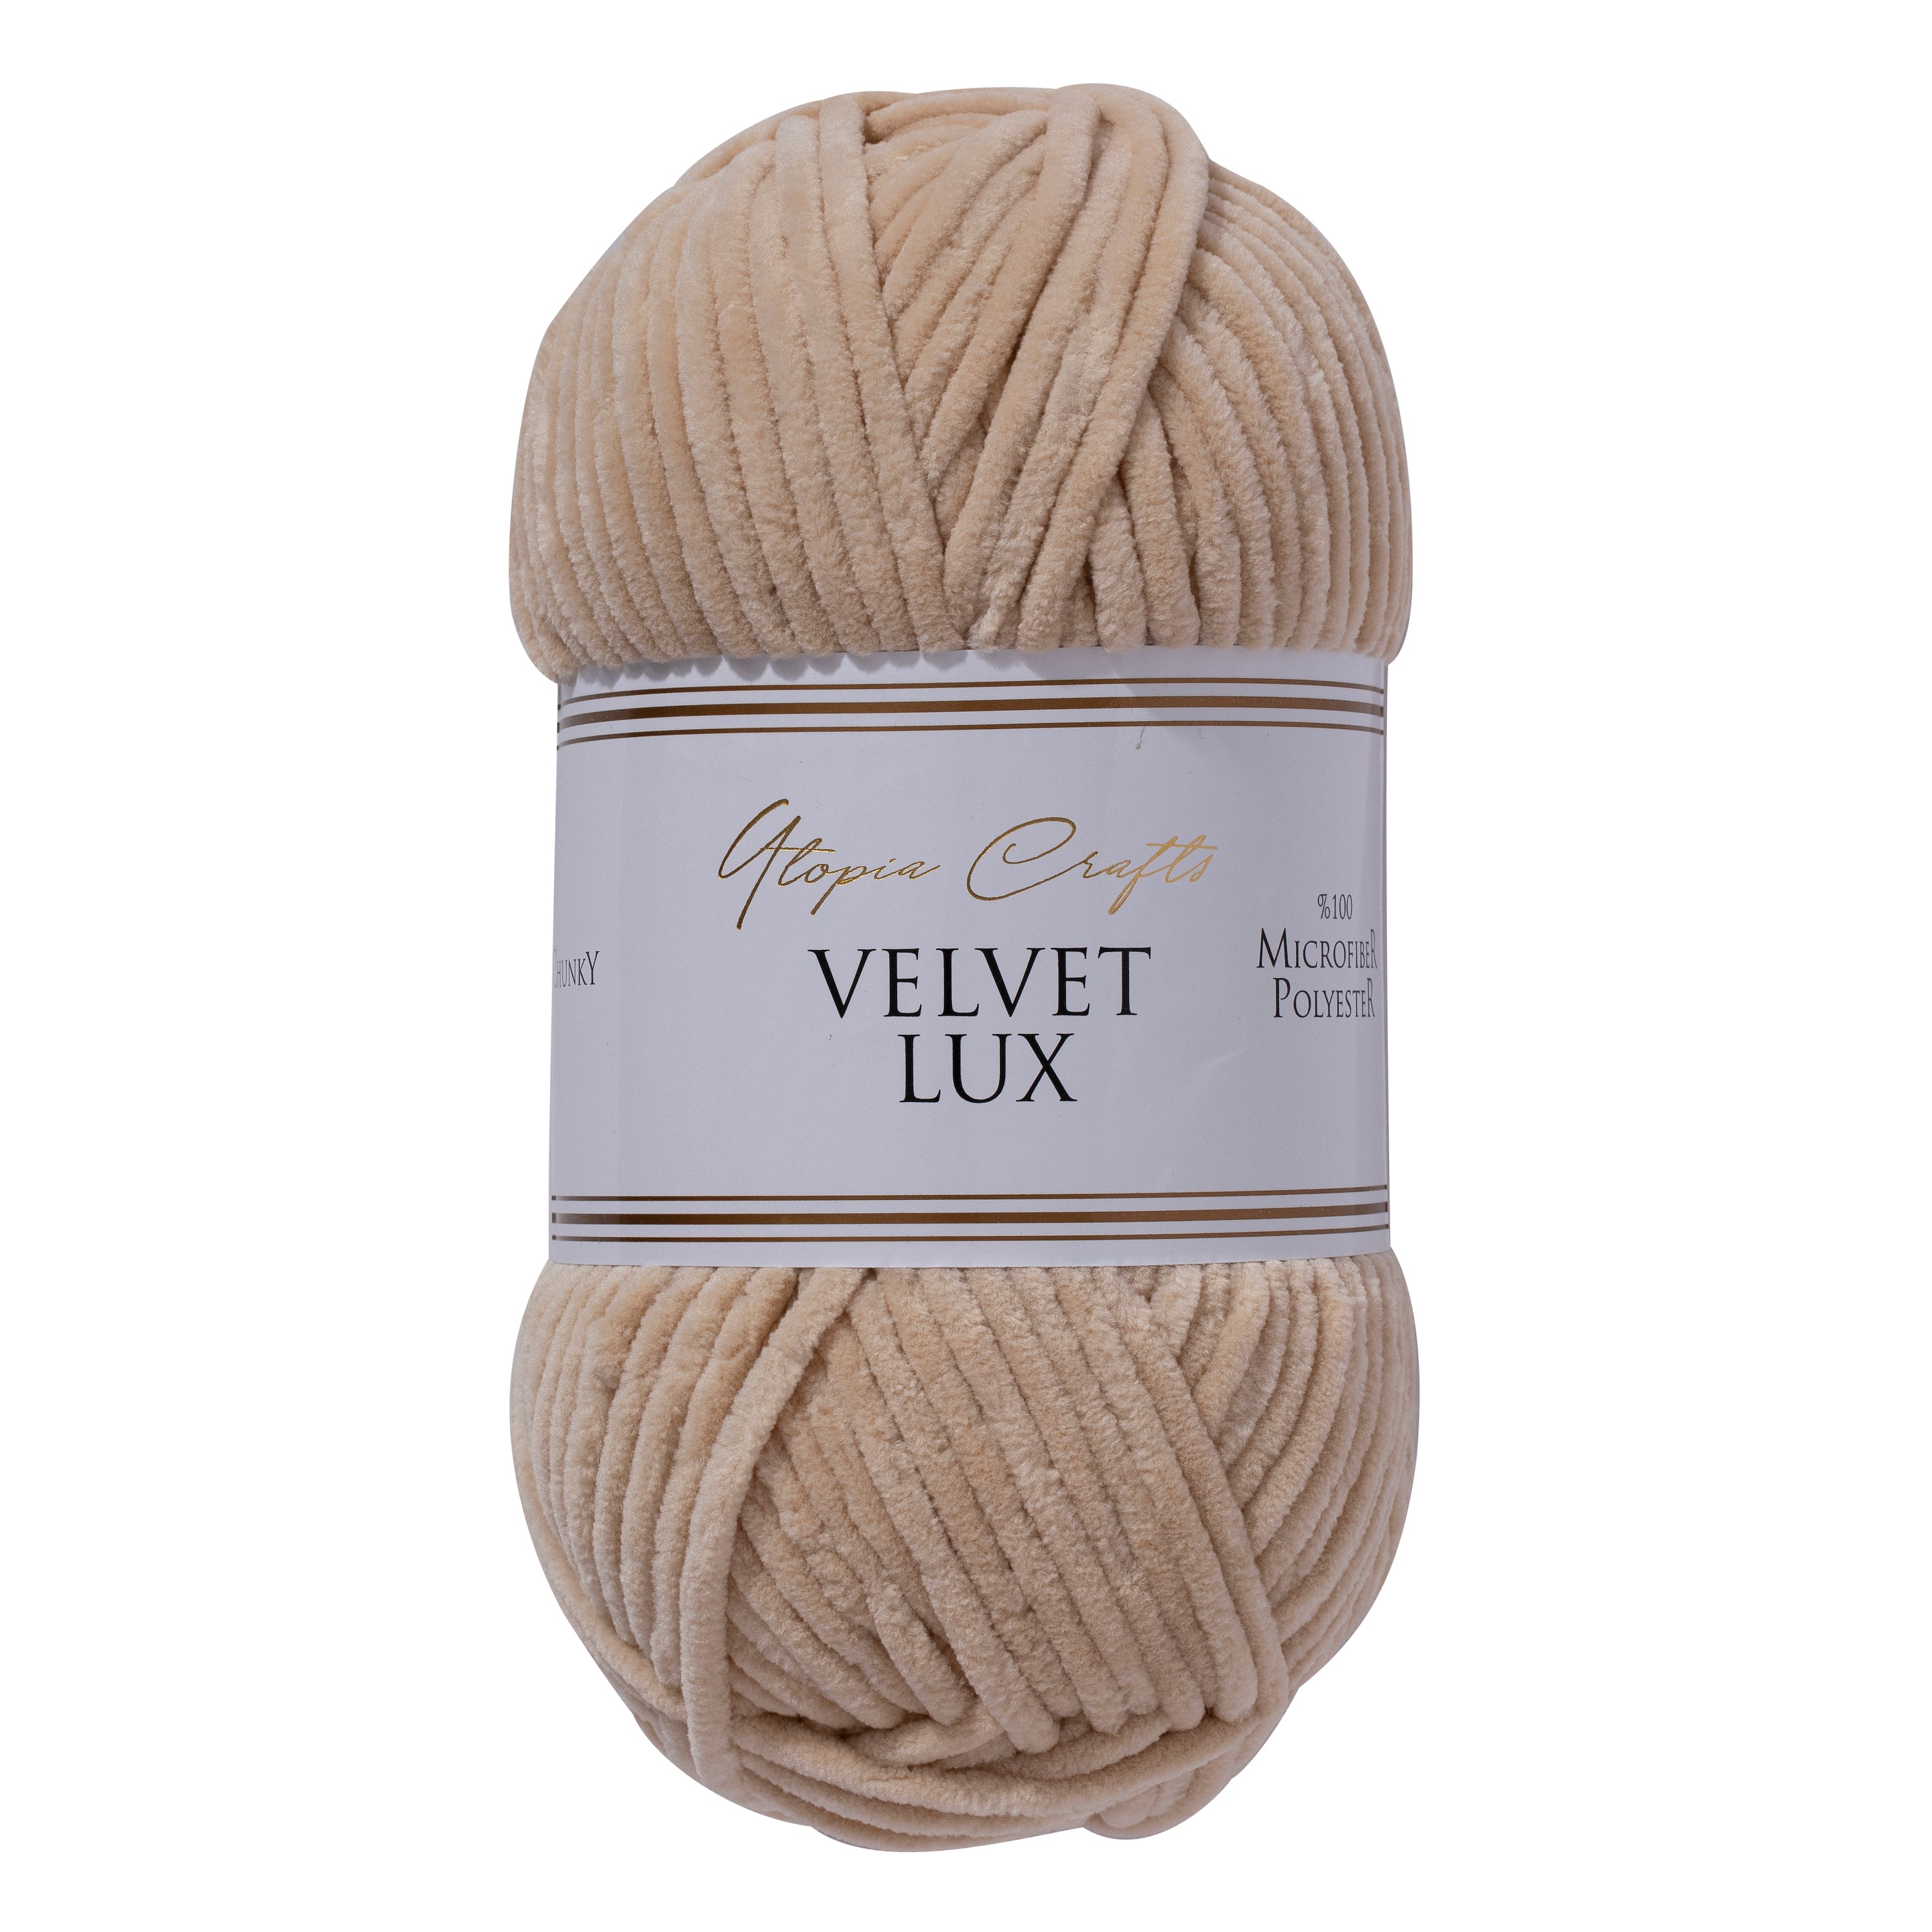 Utopia Crafts Velvet Lux Chenille Super Soft Chunky Yarn for Knitting and Crochet, 100g - 110m (Pastel Brown)